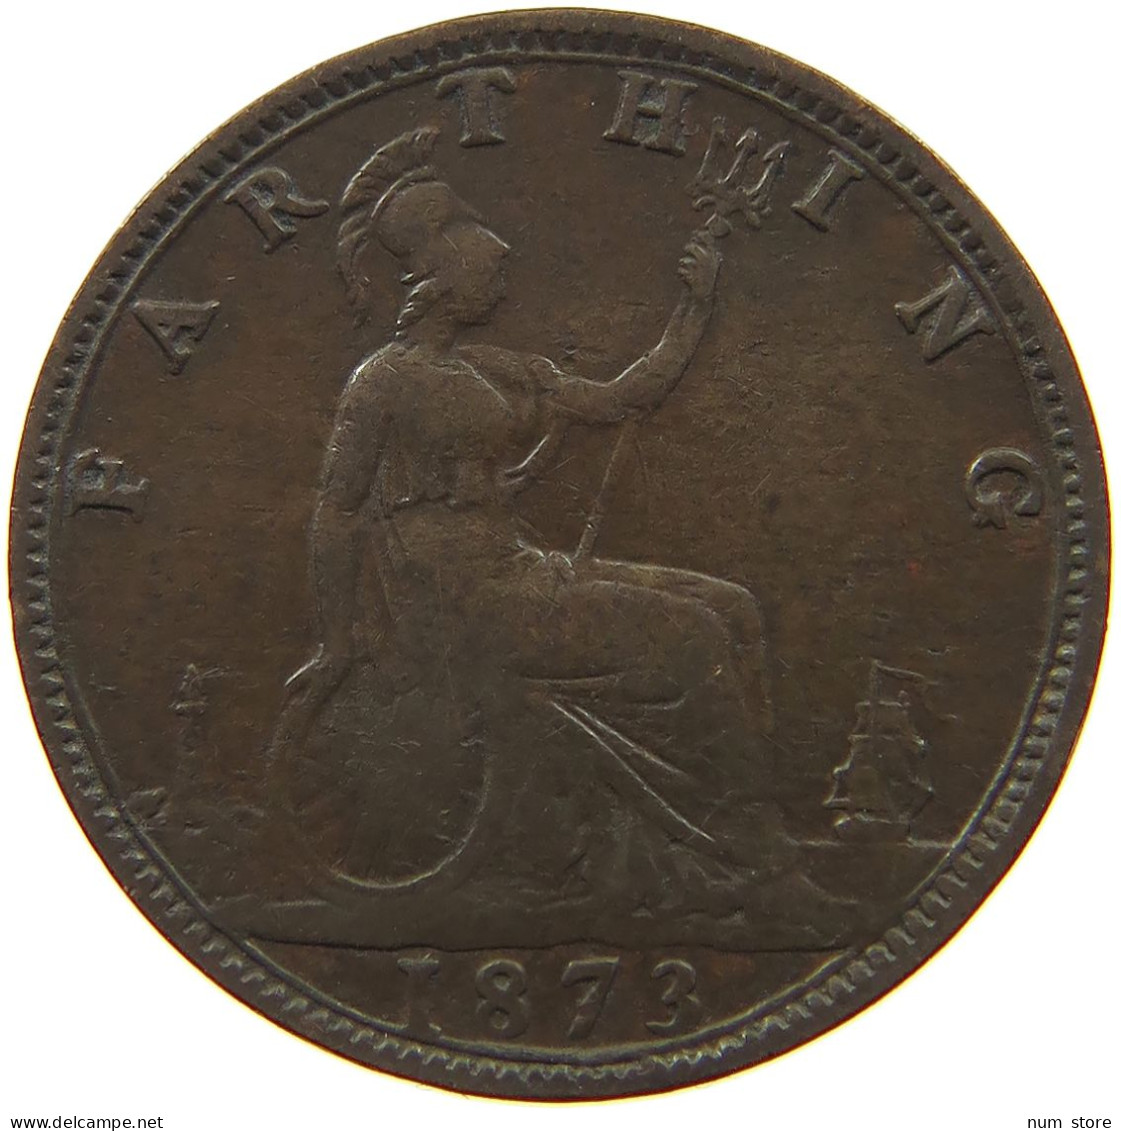 GREAT BRITAIN FARTHING 1873 Victoria 1837-1901 #a036 0711 - B. 1 Farthing